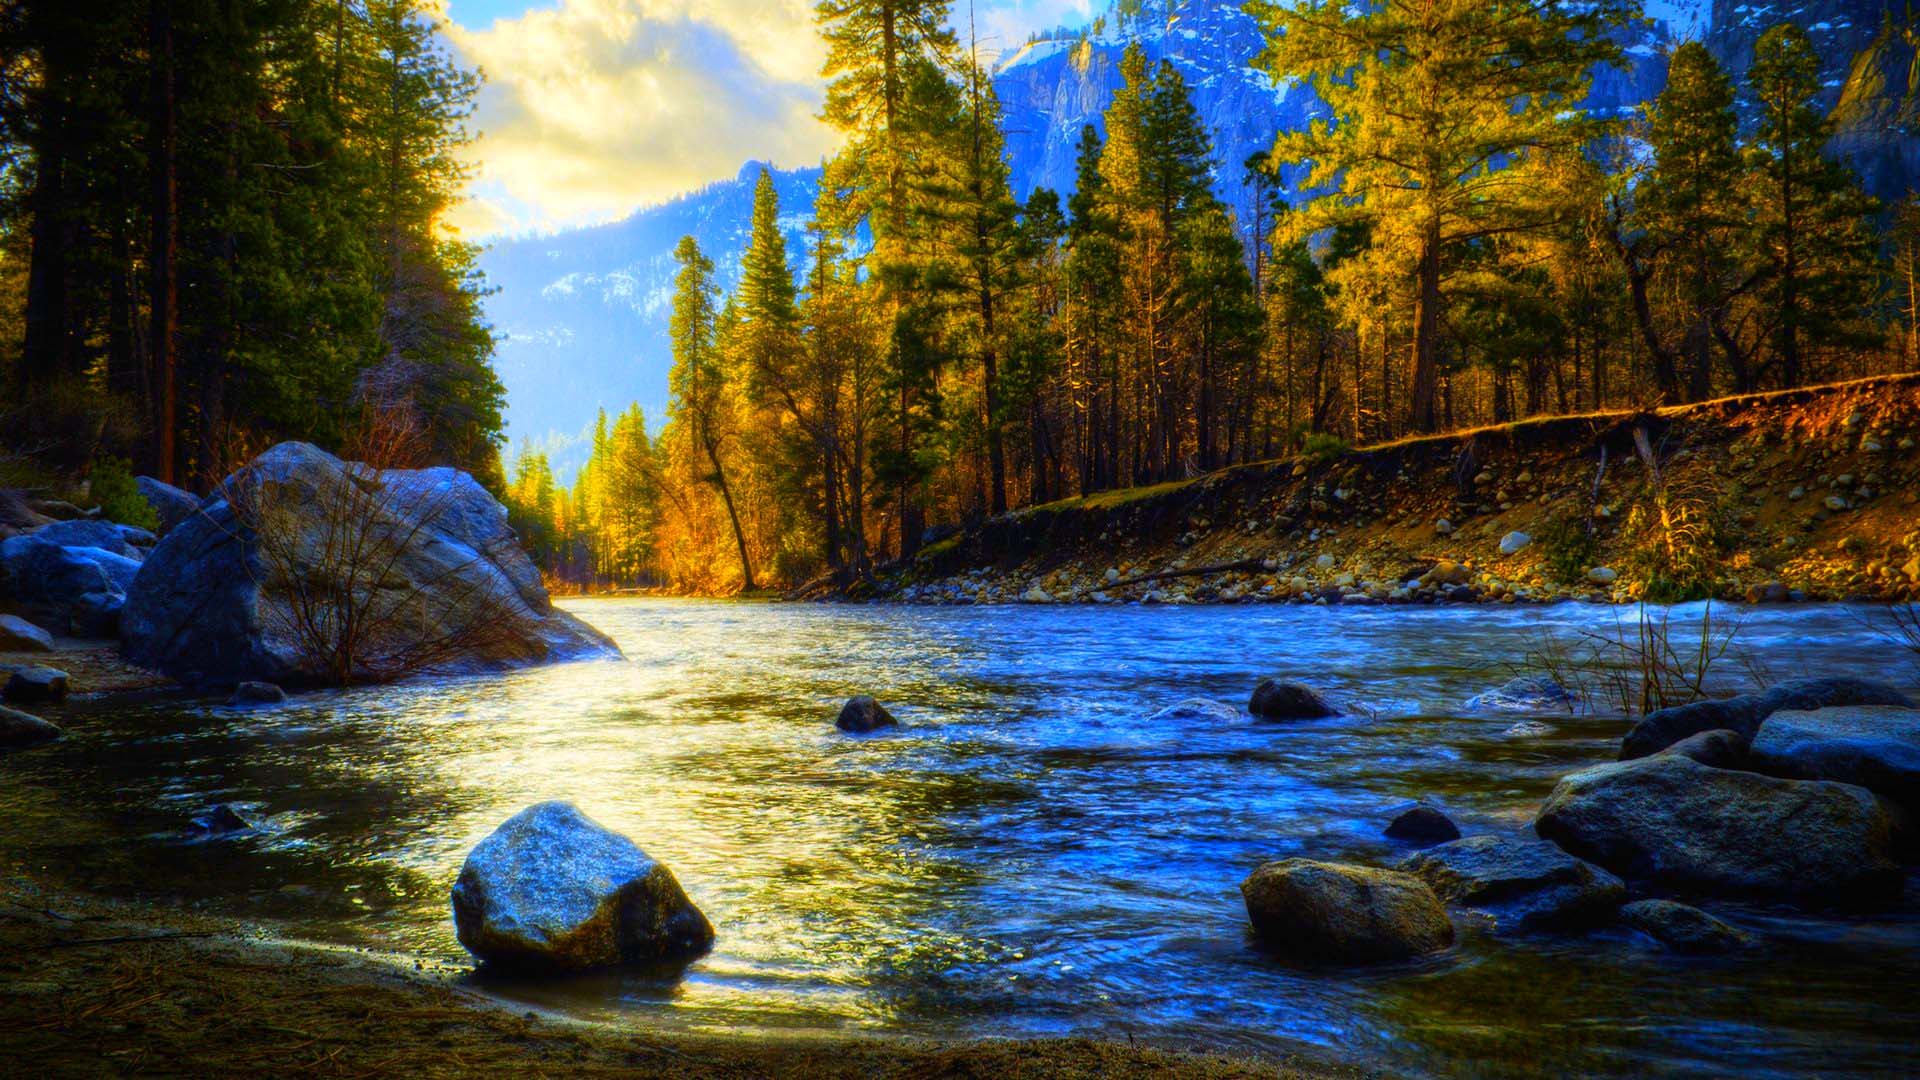 spring river nice images download picture photos wallpaper download